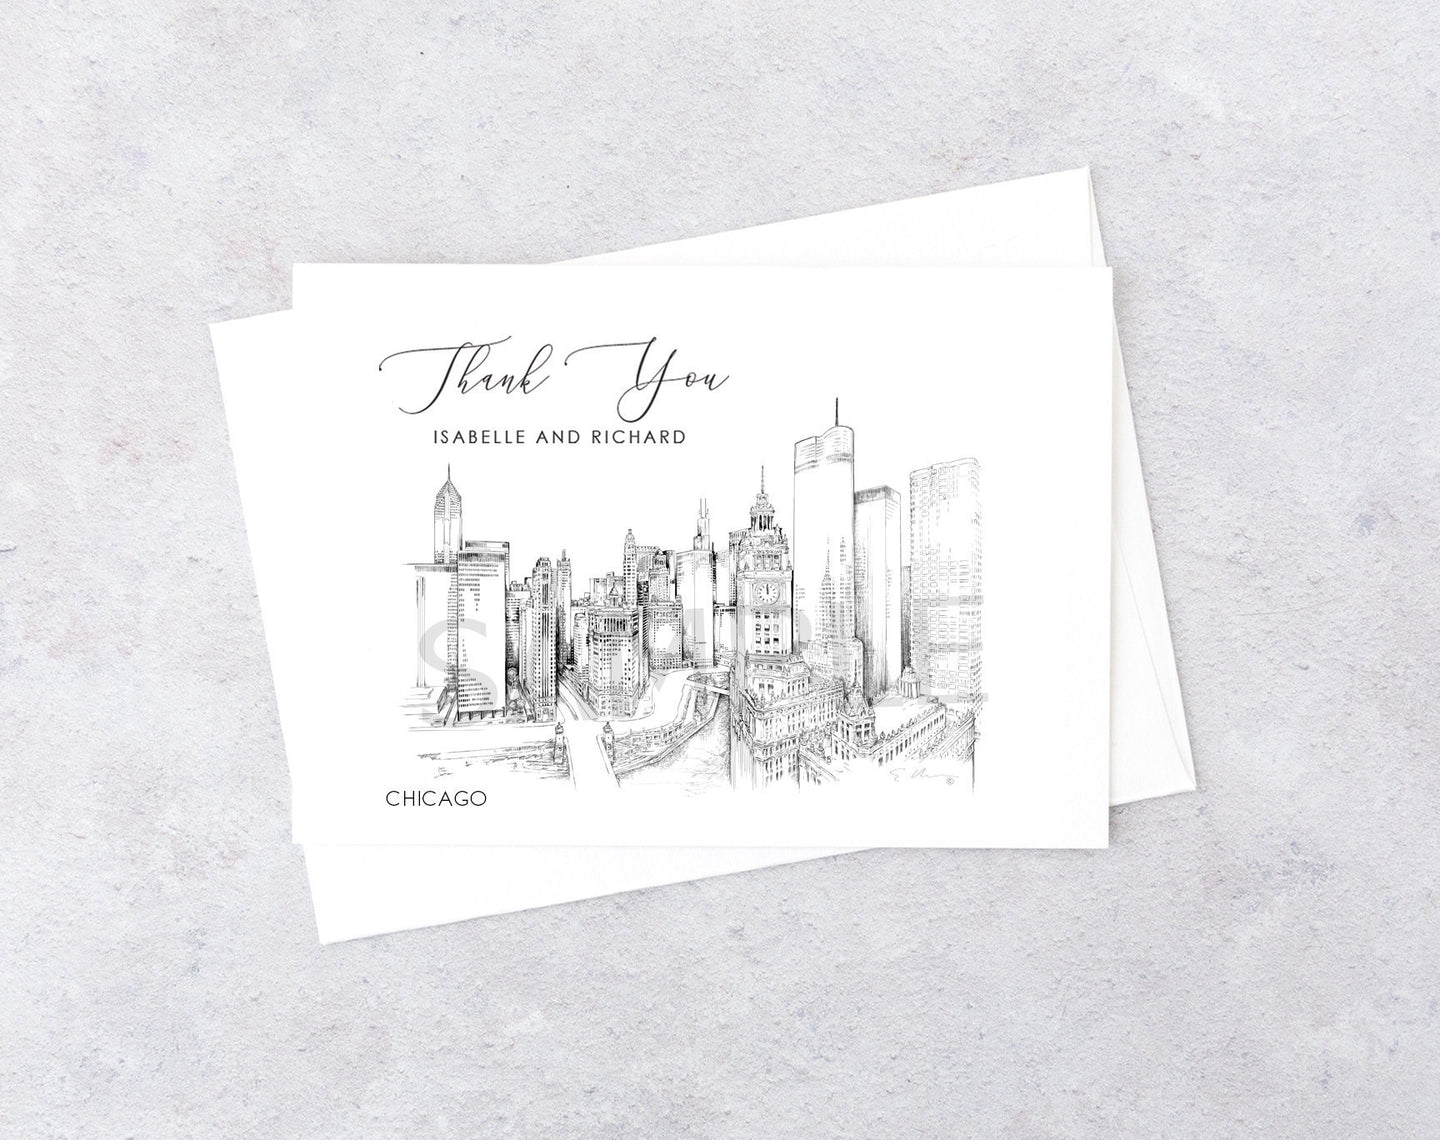 Chicago Skyline Thank You Cards, Personal Note Cards, Bridal Shower, Real Estate Agent, Corporate Thank you Cards (set of 25 cards)